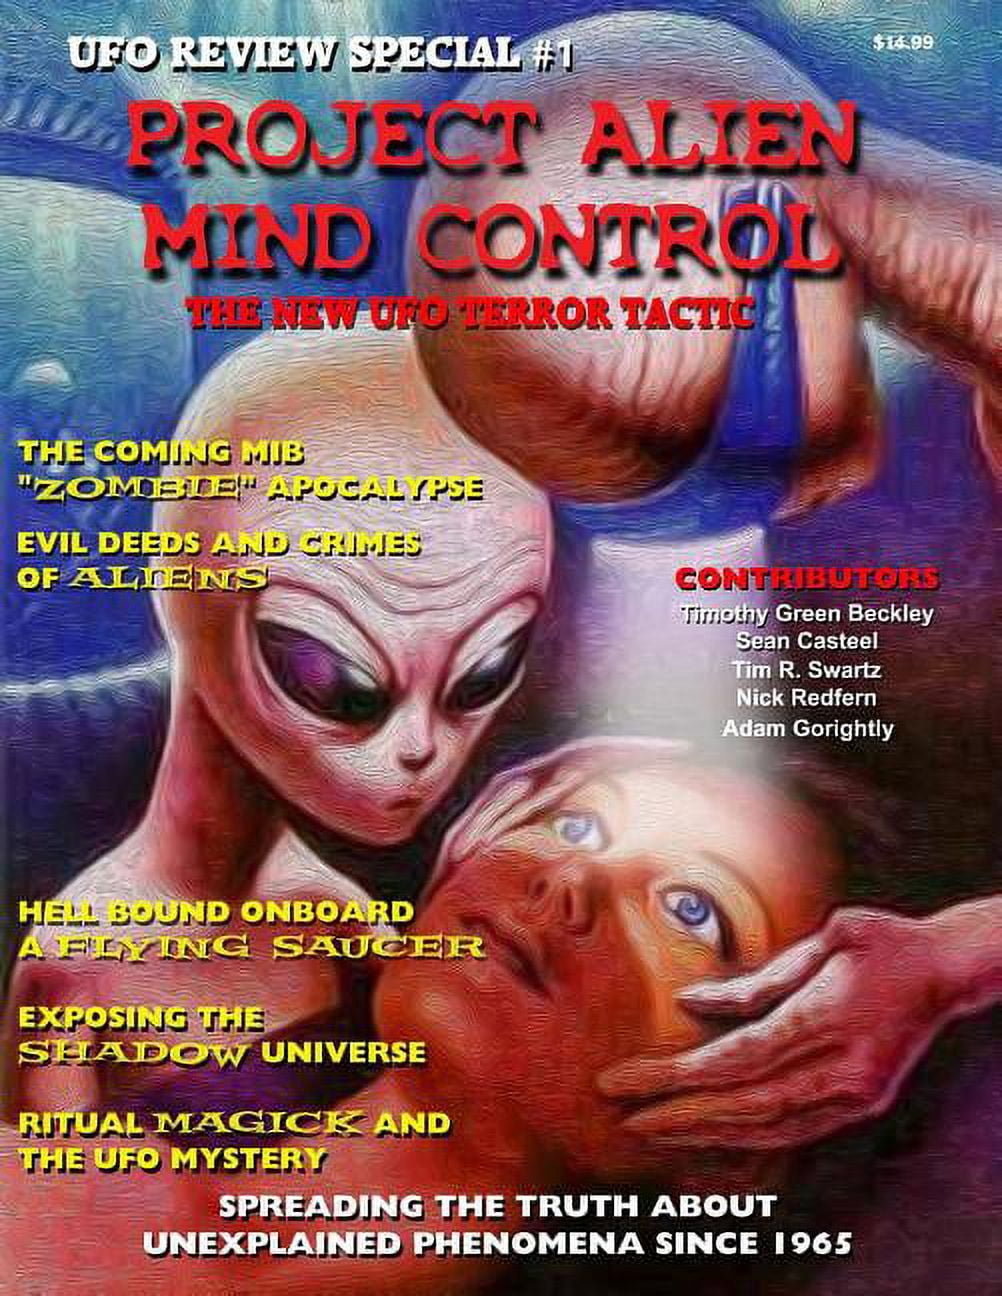 Project Alien Mind Control - UFO Review Special: The New UFO Terror Tactic  (Paperback) by Sean Casteel, Tim R Swartz, Nick Redfern